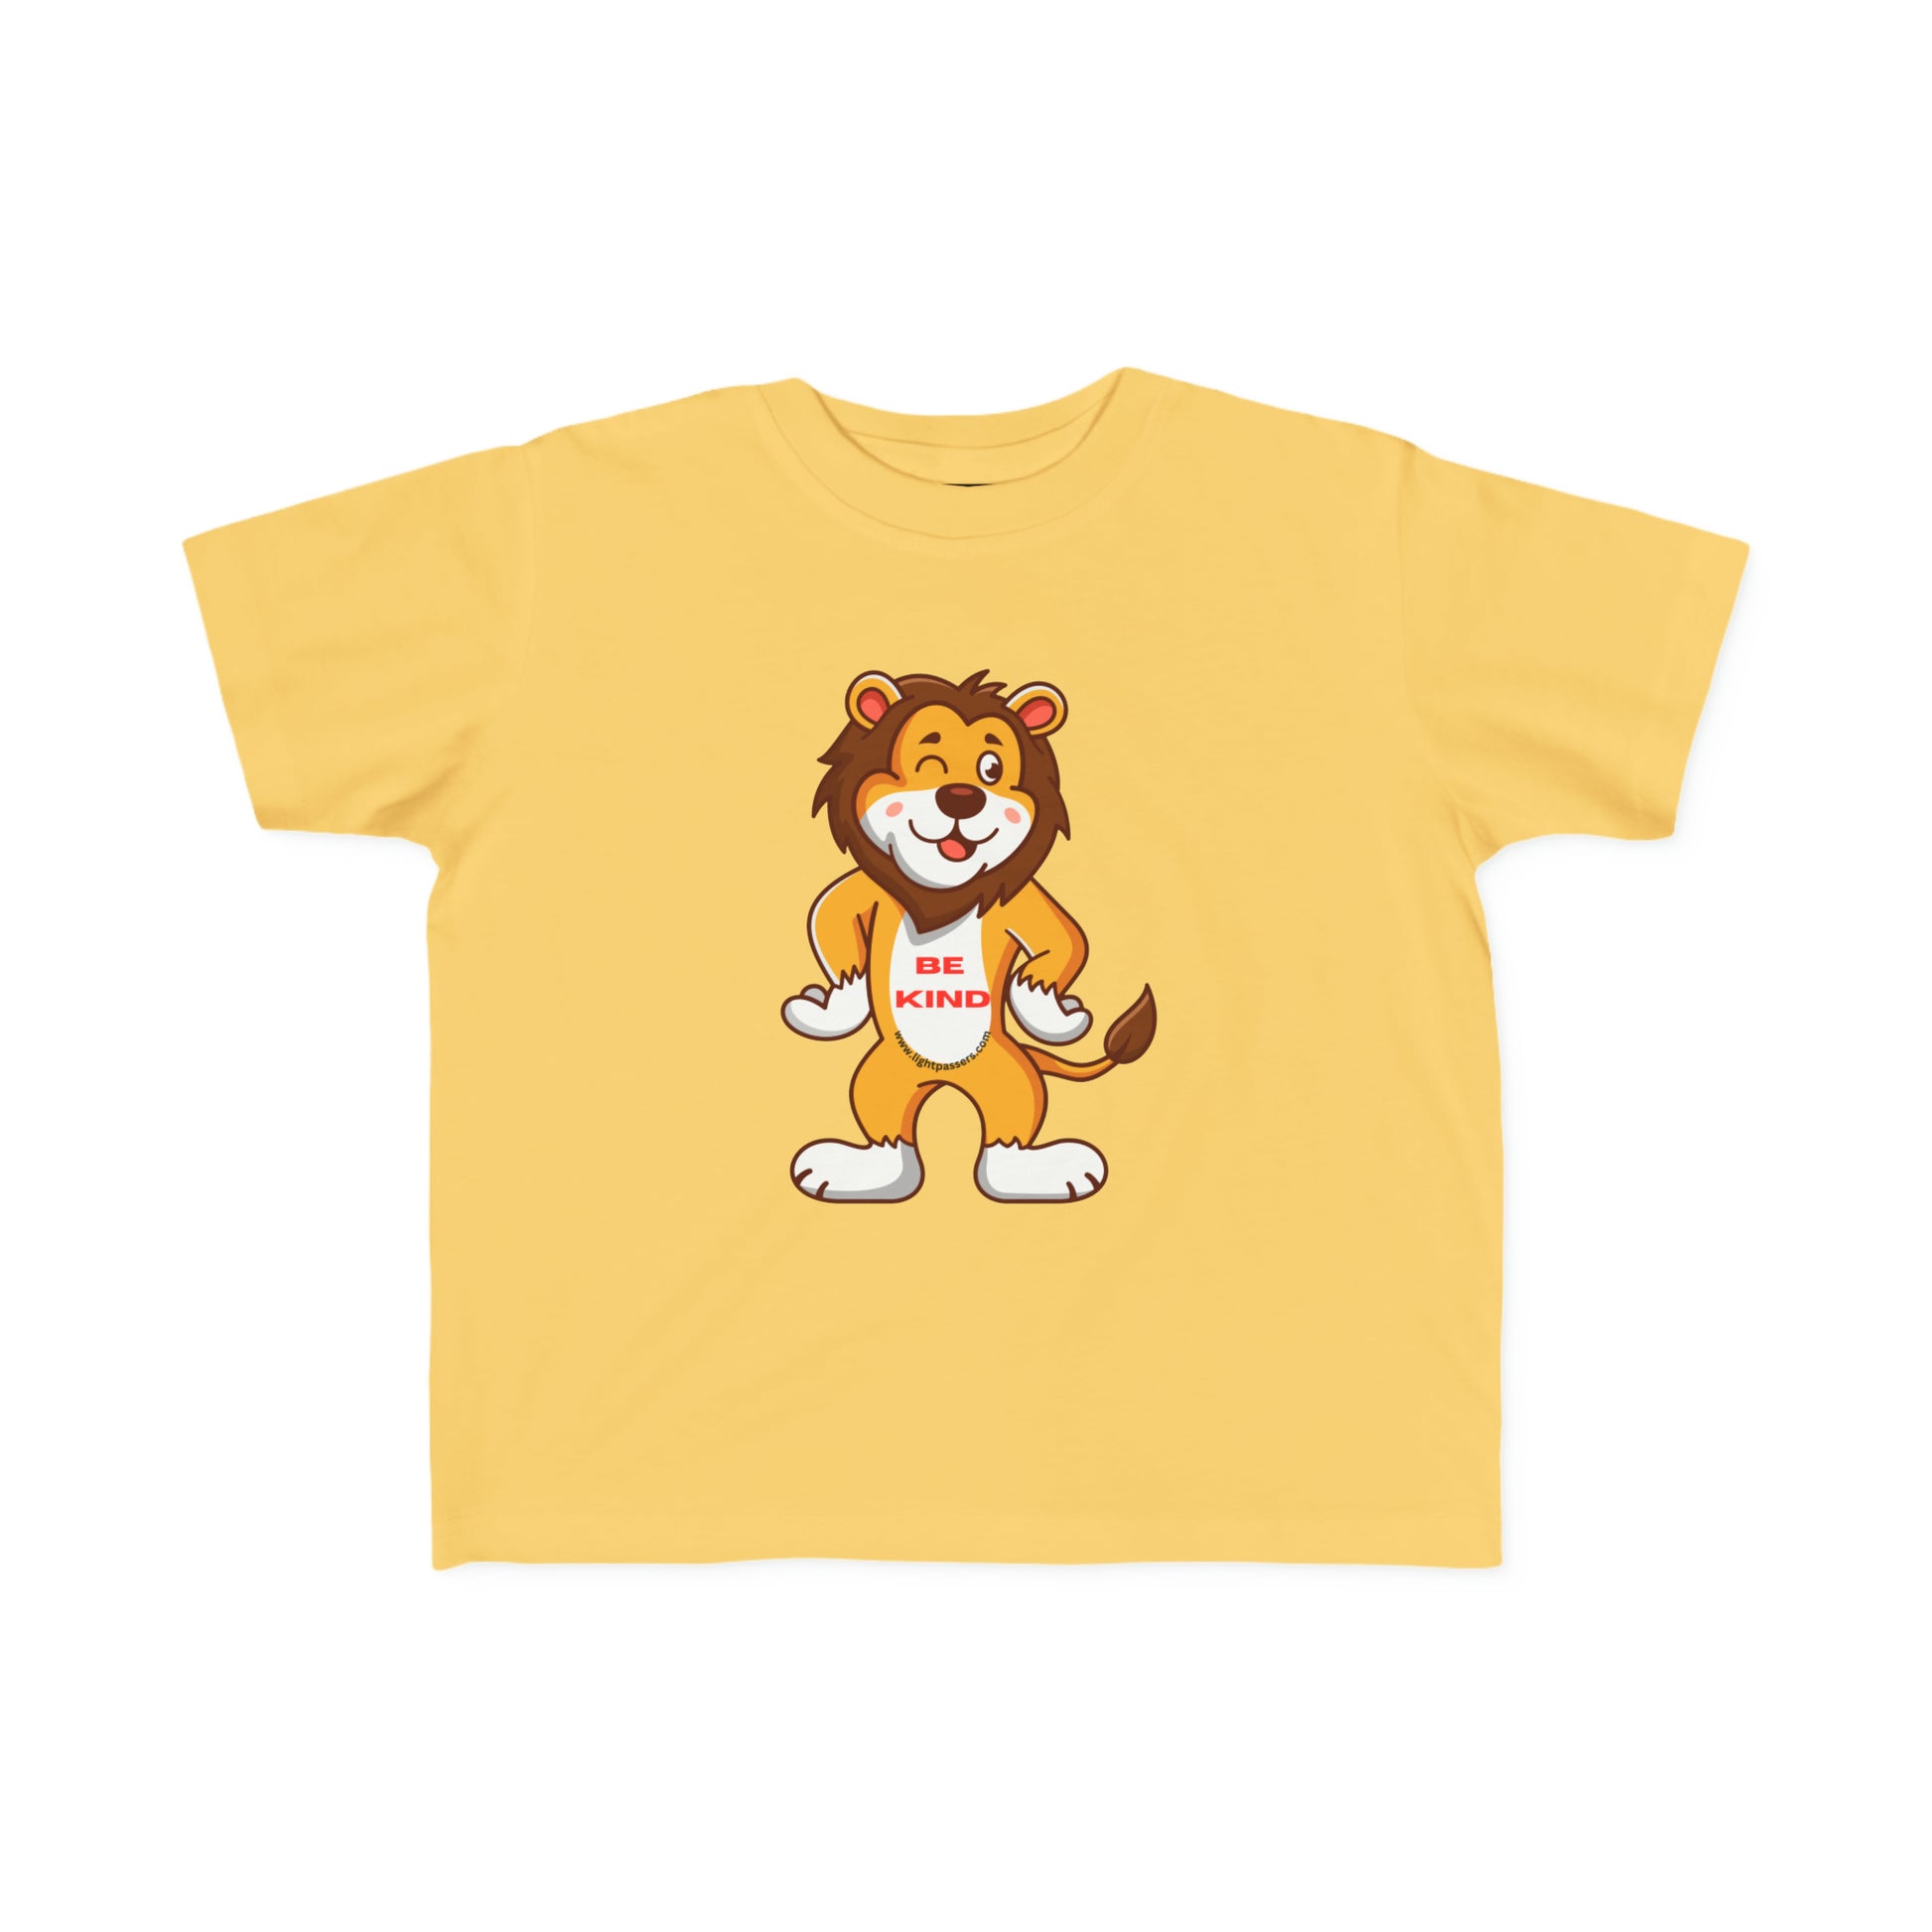 A yellow toddler t-shirt featuring a cartoon lion design, crafted from soft, durable 100% combed cotton. Light fabric, tear-away label, and a classic fit for comfort.